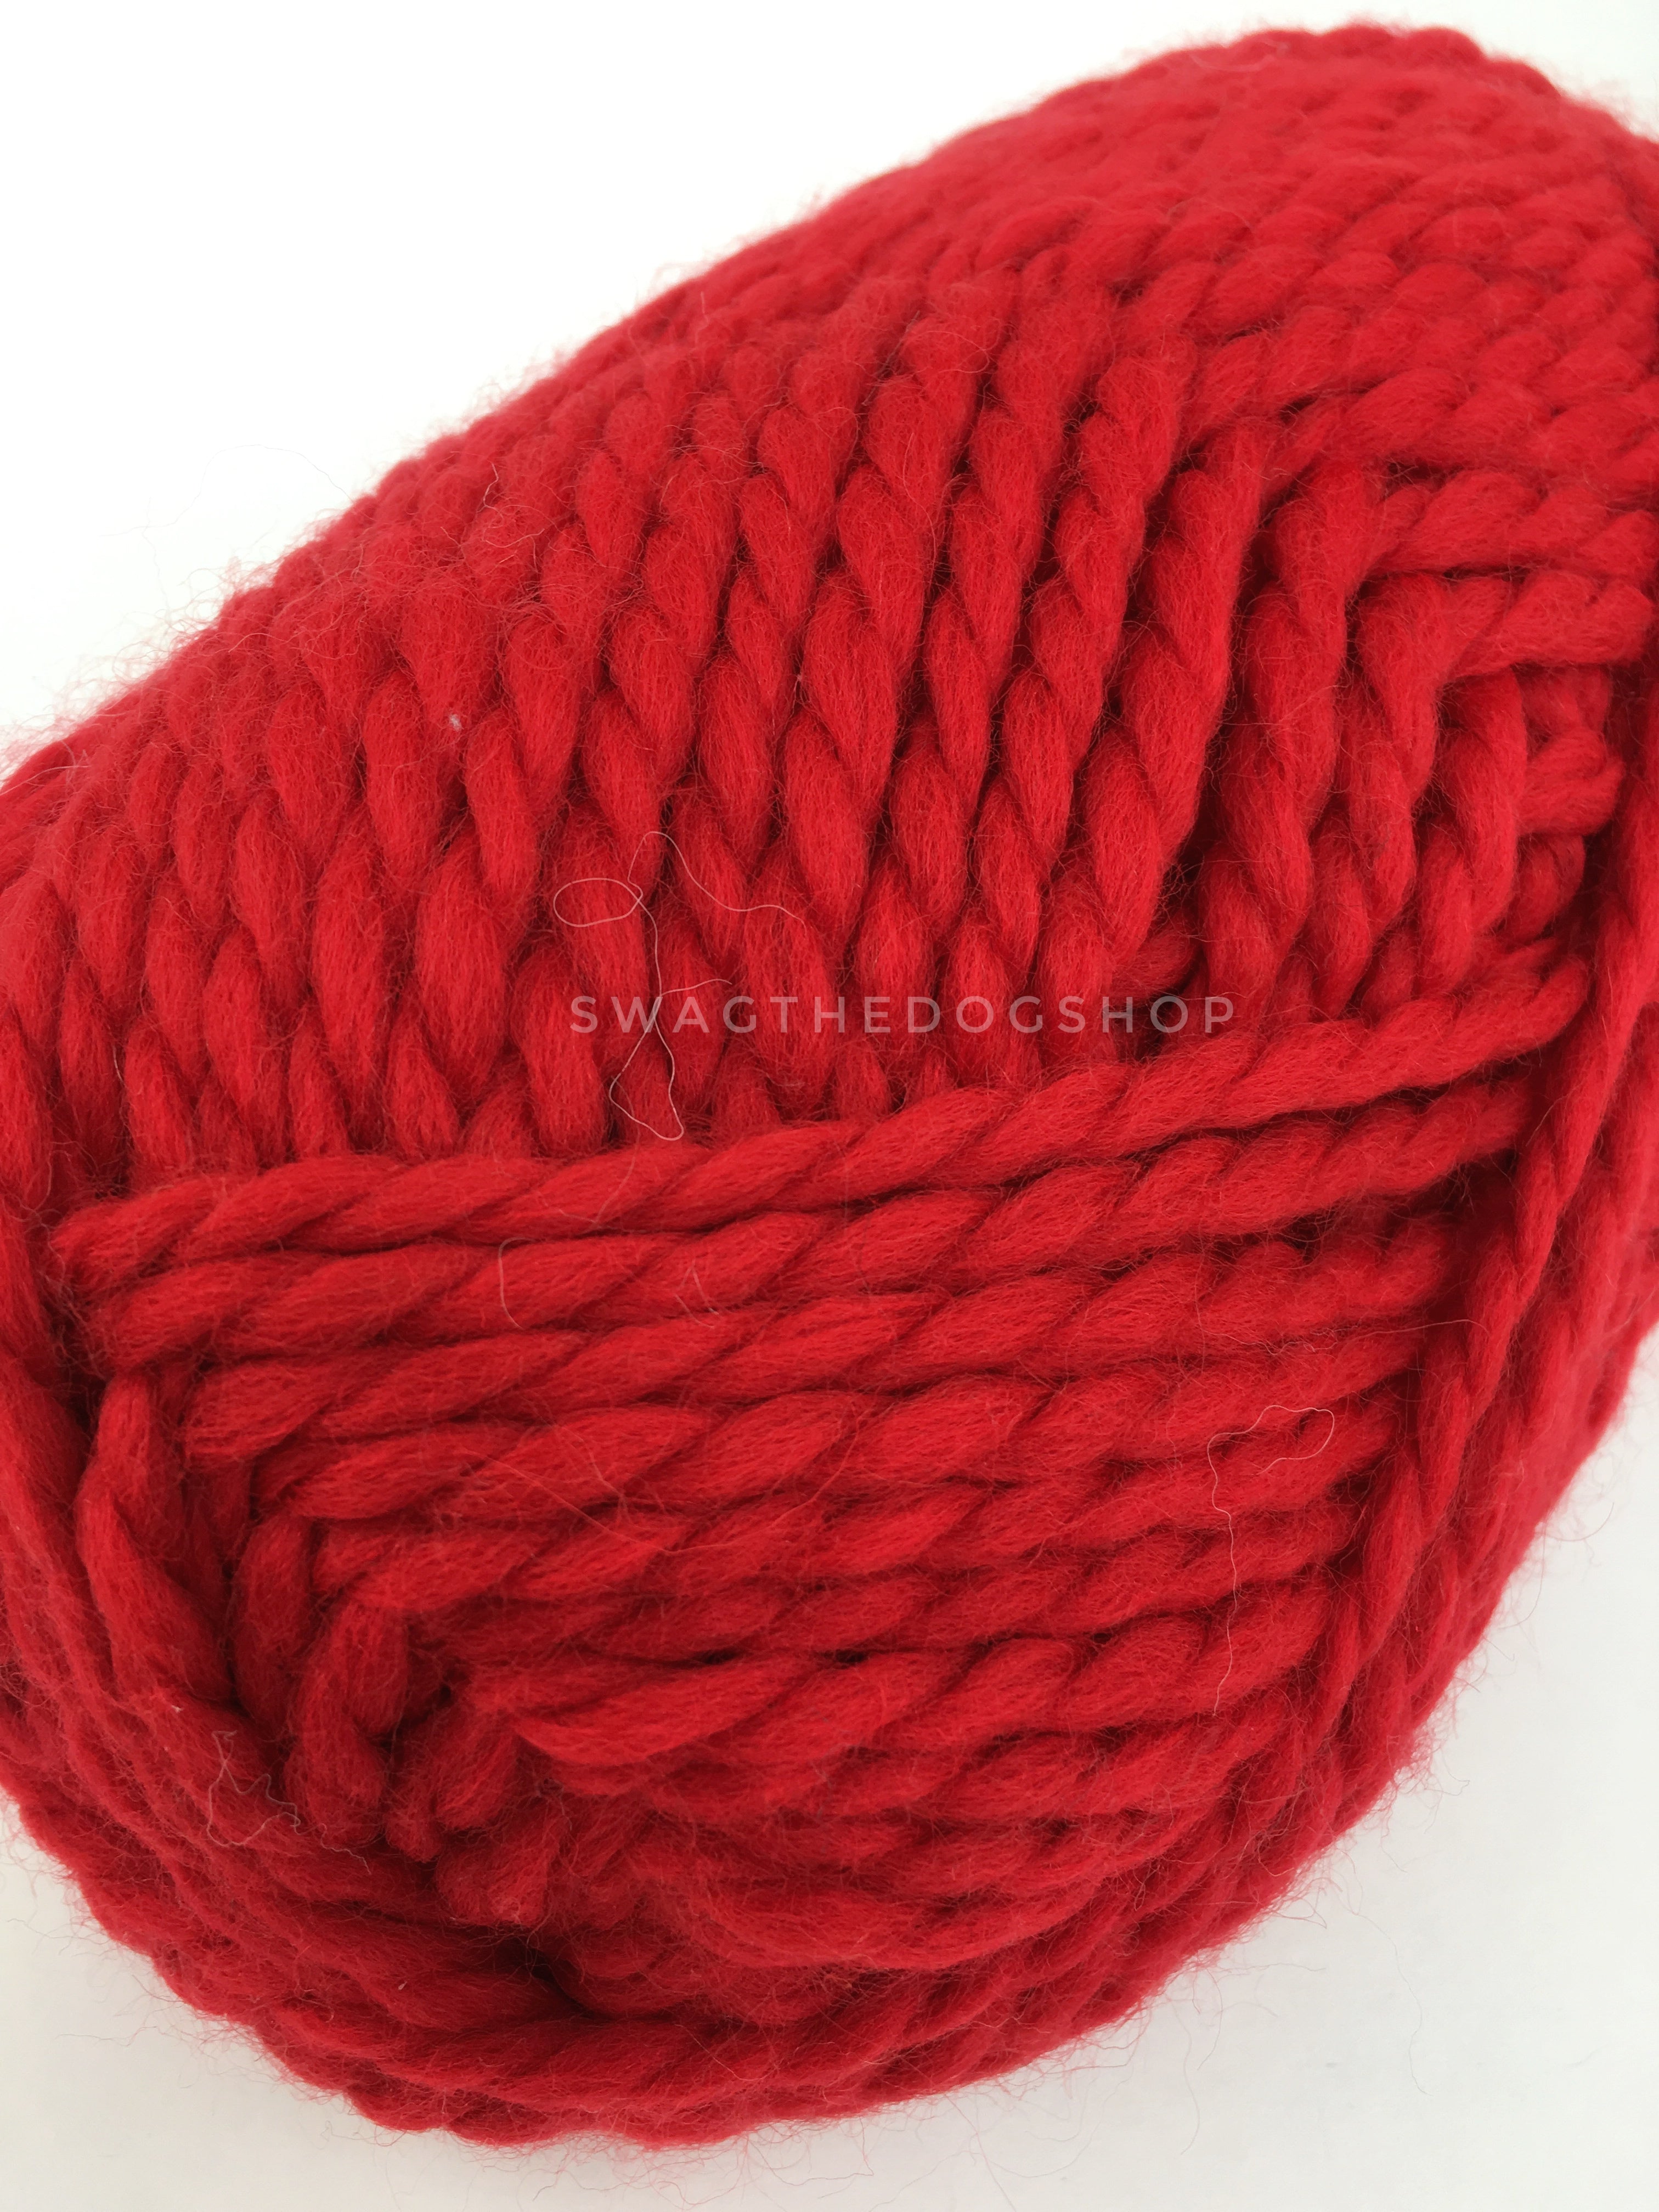 Christmas Red Swagsnood - Close Up View of Yarn. Bright Red Color Dog Snood with Accent Button